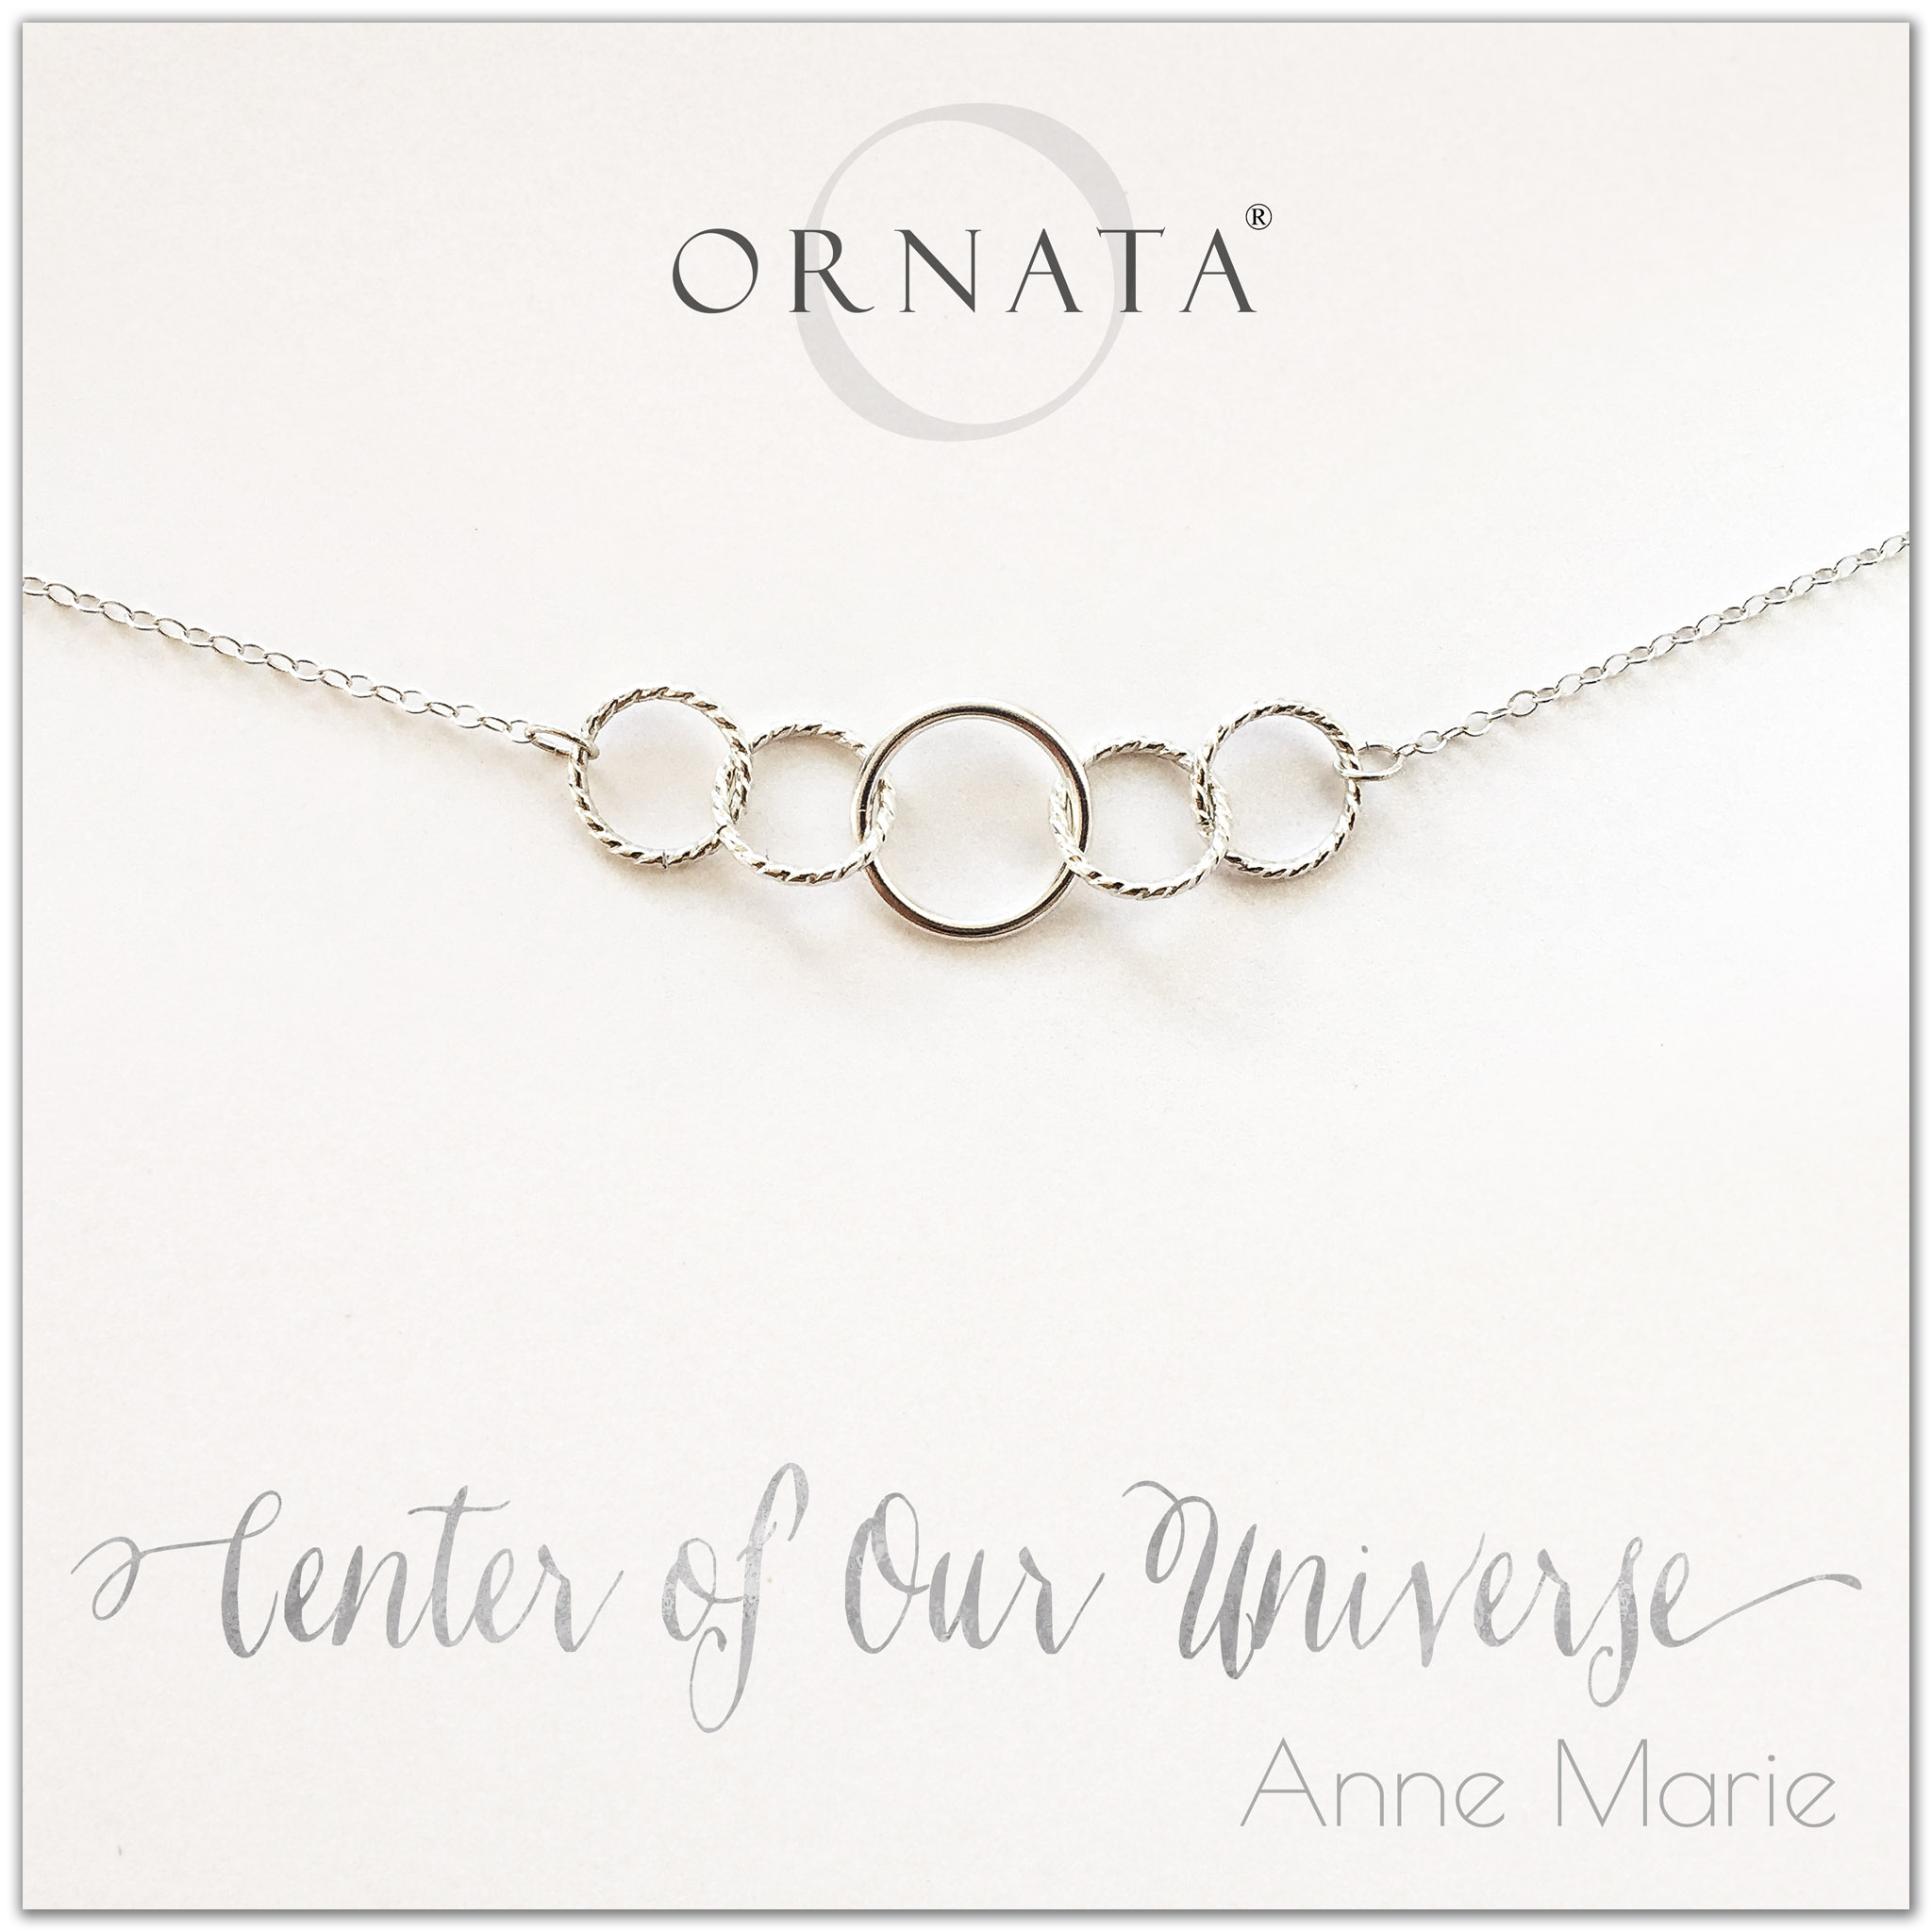 Center of our Universe necklace - personalized silver necklaces. Our sterling silver custom jewelry is a perfect gift for best friends, sisters, daughters, or mothers. Inspirational jewelry is also a good gift for Mother’s Day. Interlocking silver rings represent family and friendship.